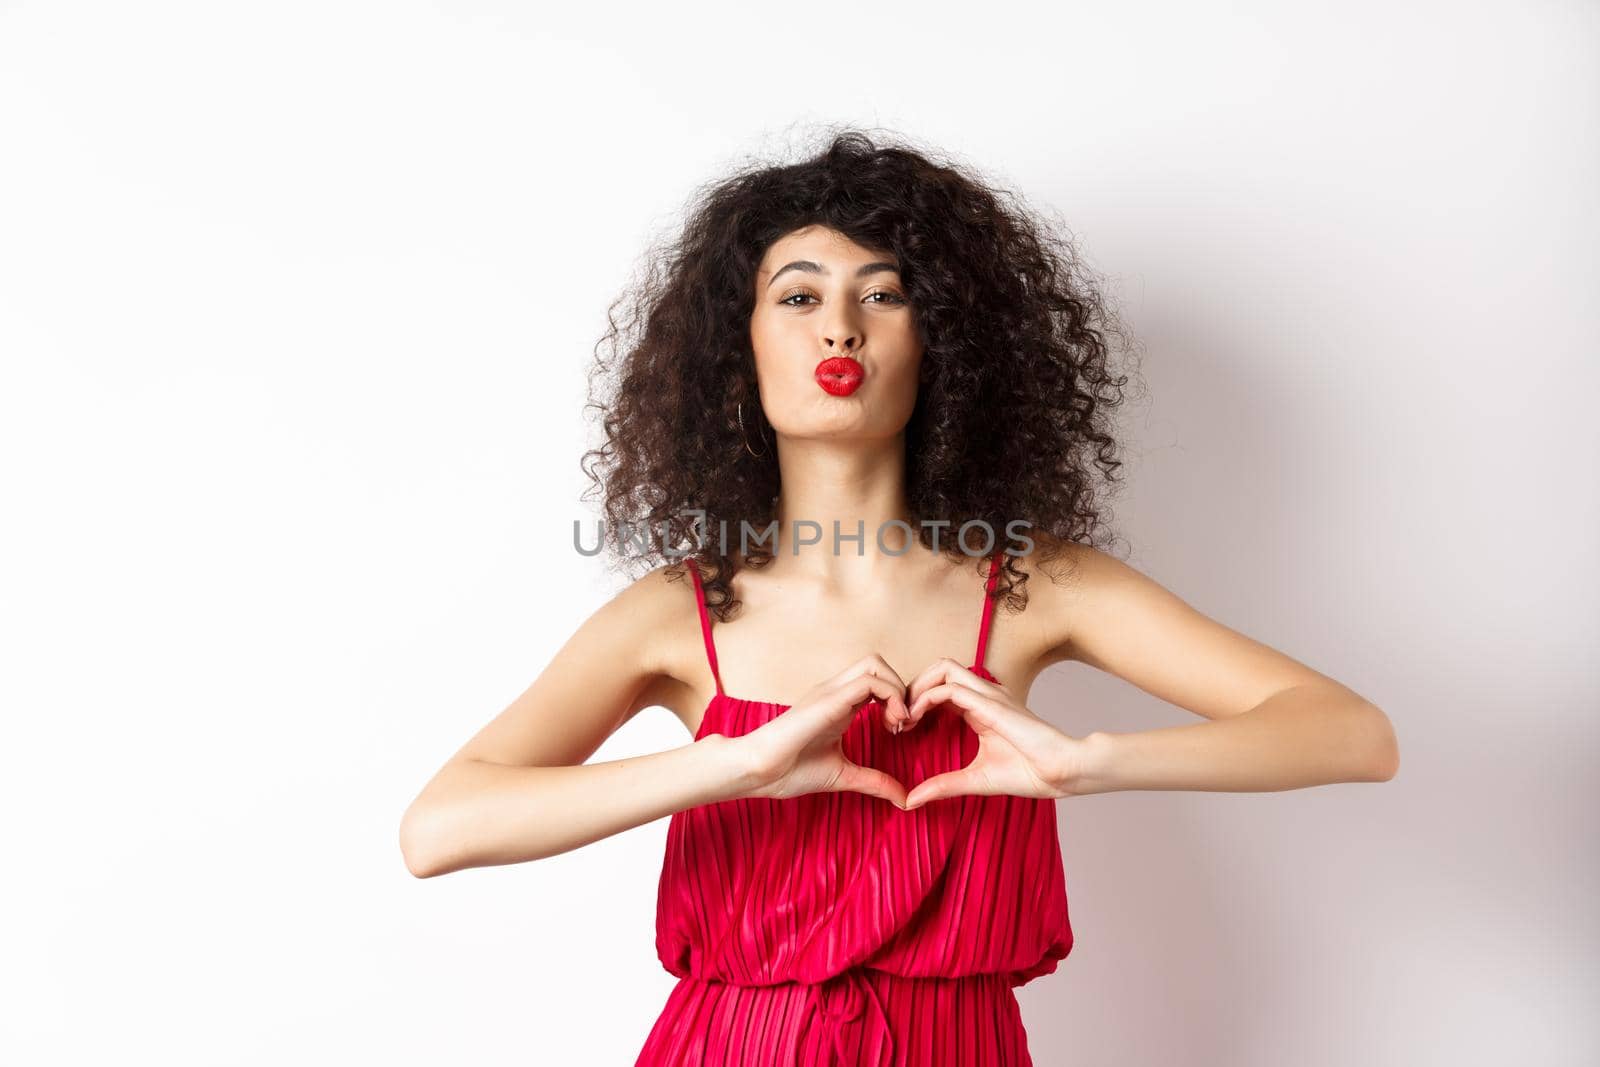 Beautiful lady with curly hair, red dress, showing heart symbol and pucker lips for kiss, love you gesture, standing on white background.